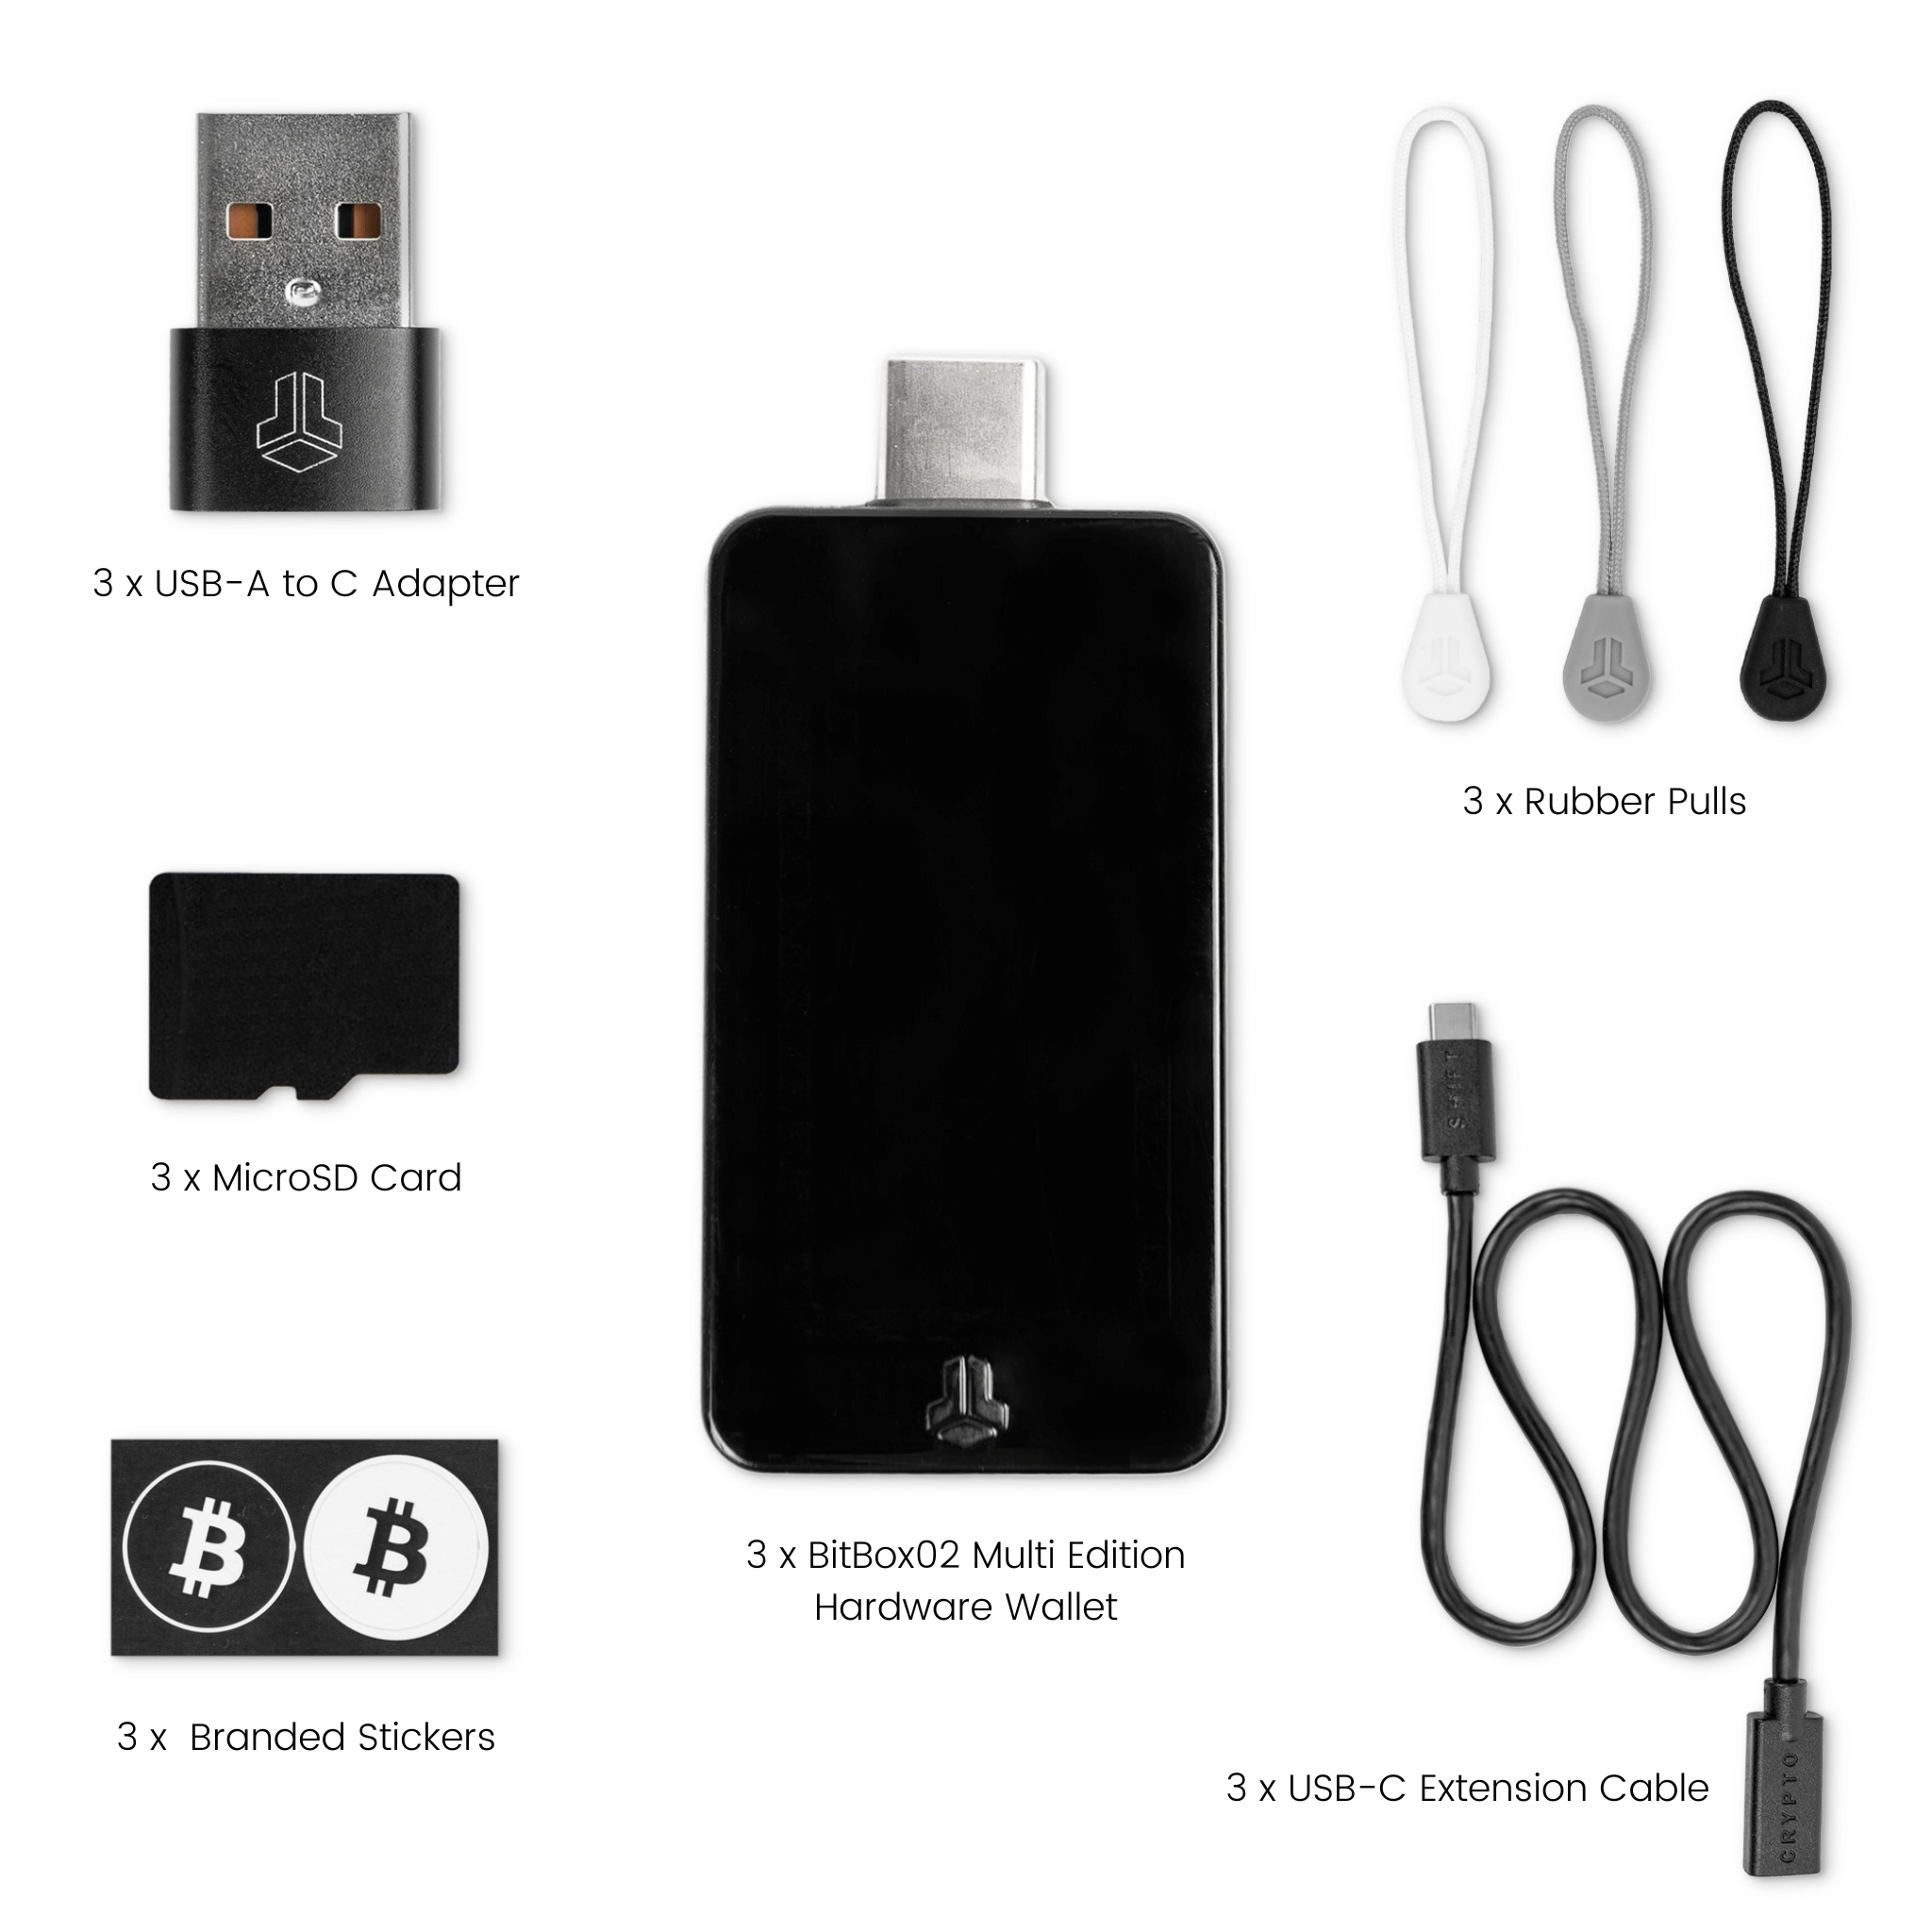 BitBox02 Multi Edition Pack of 3 Cryptocurrency Hardware Wallets Package Contents